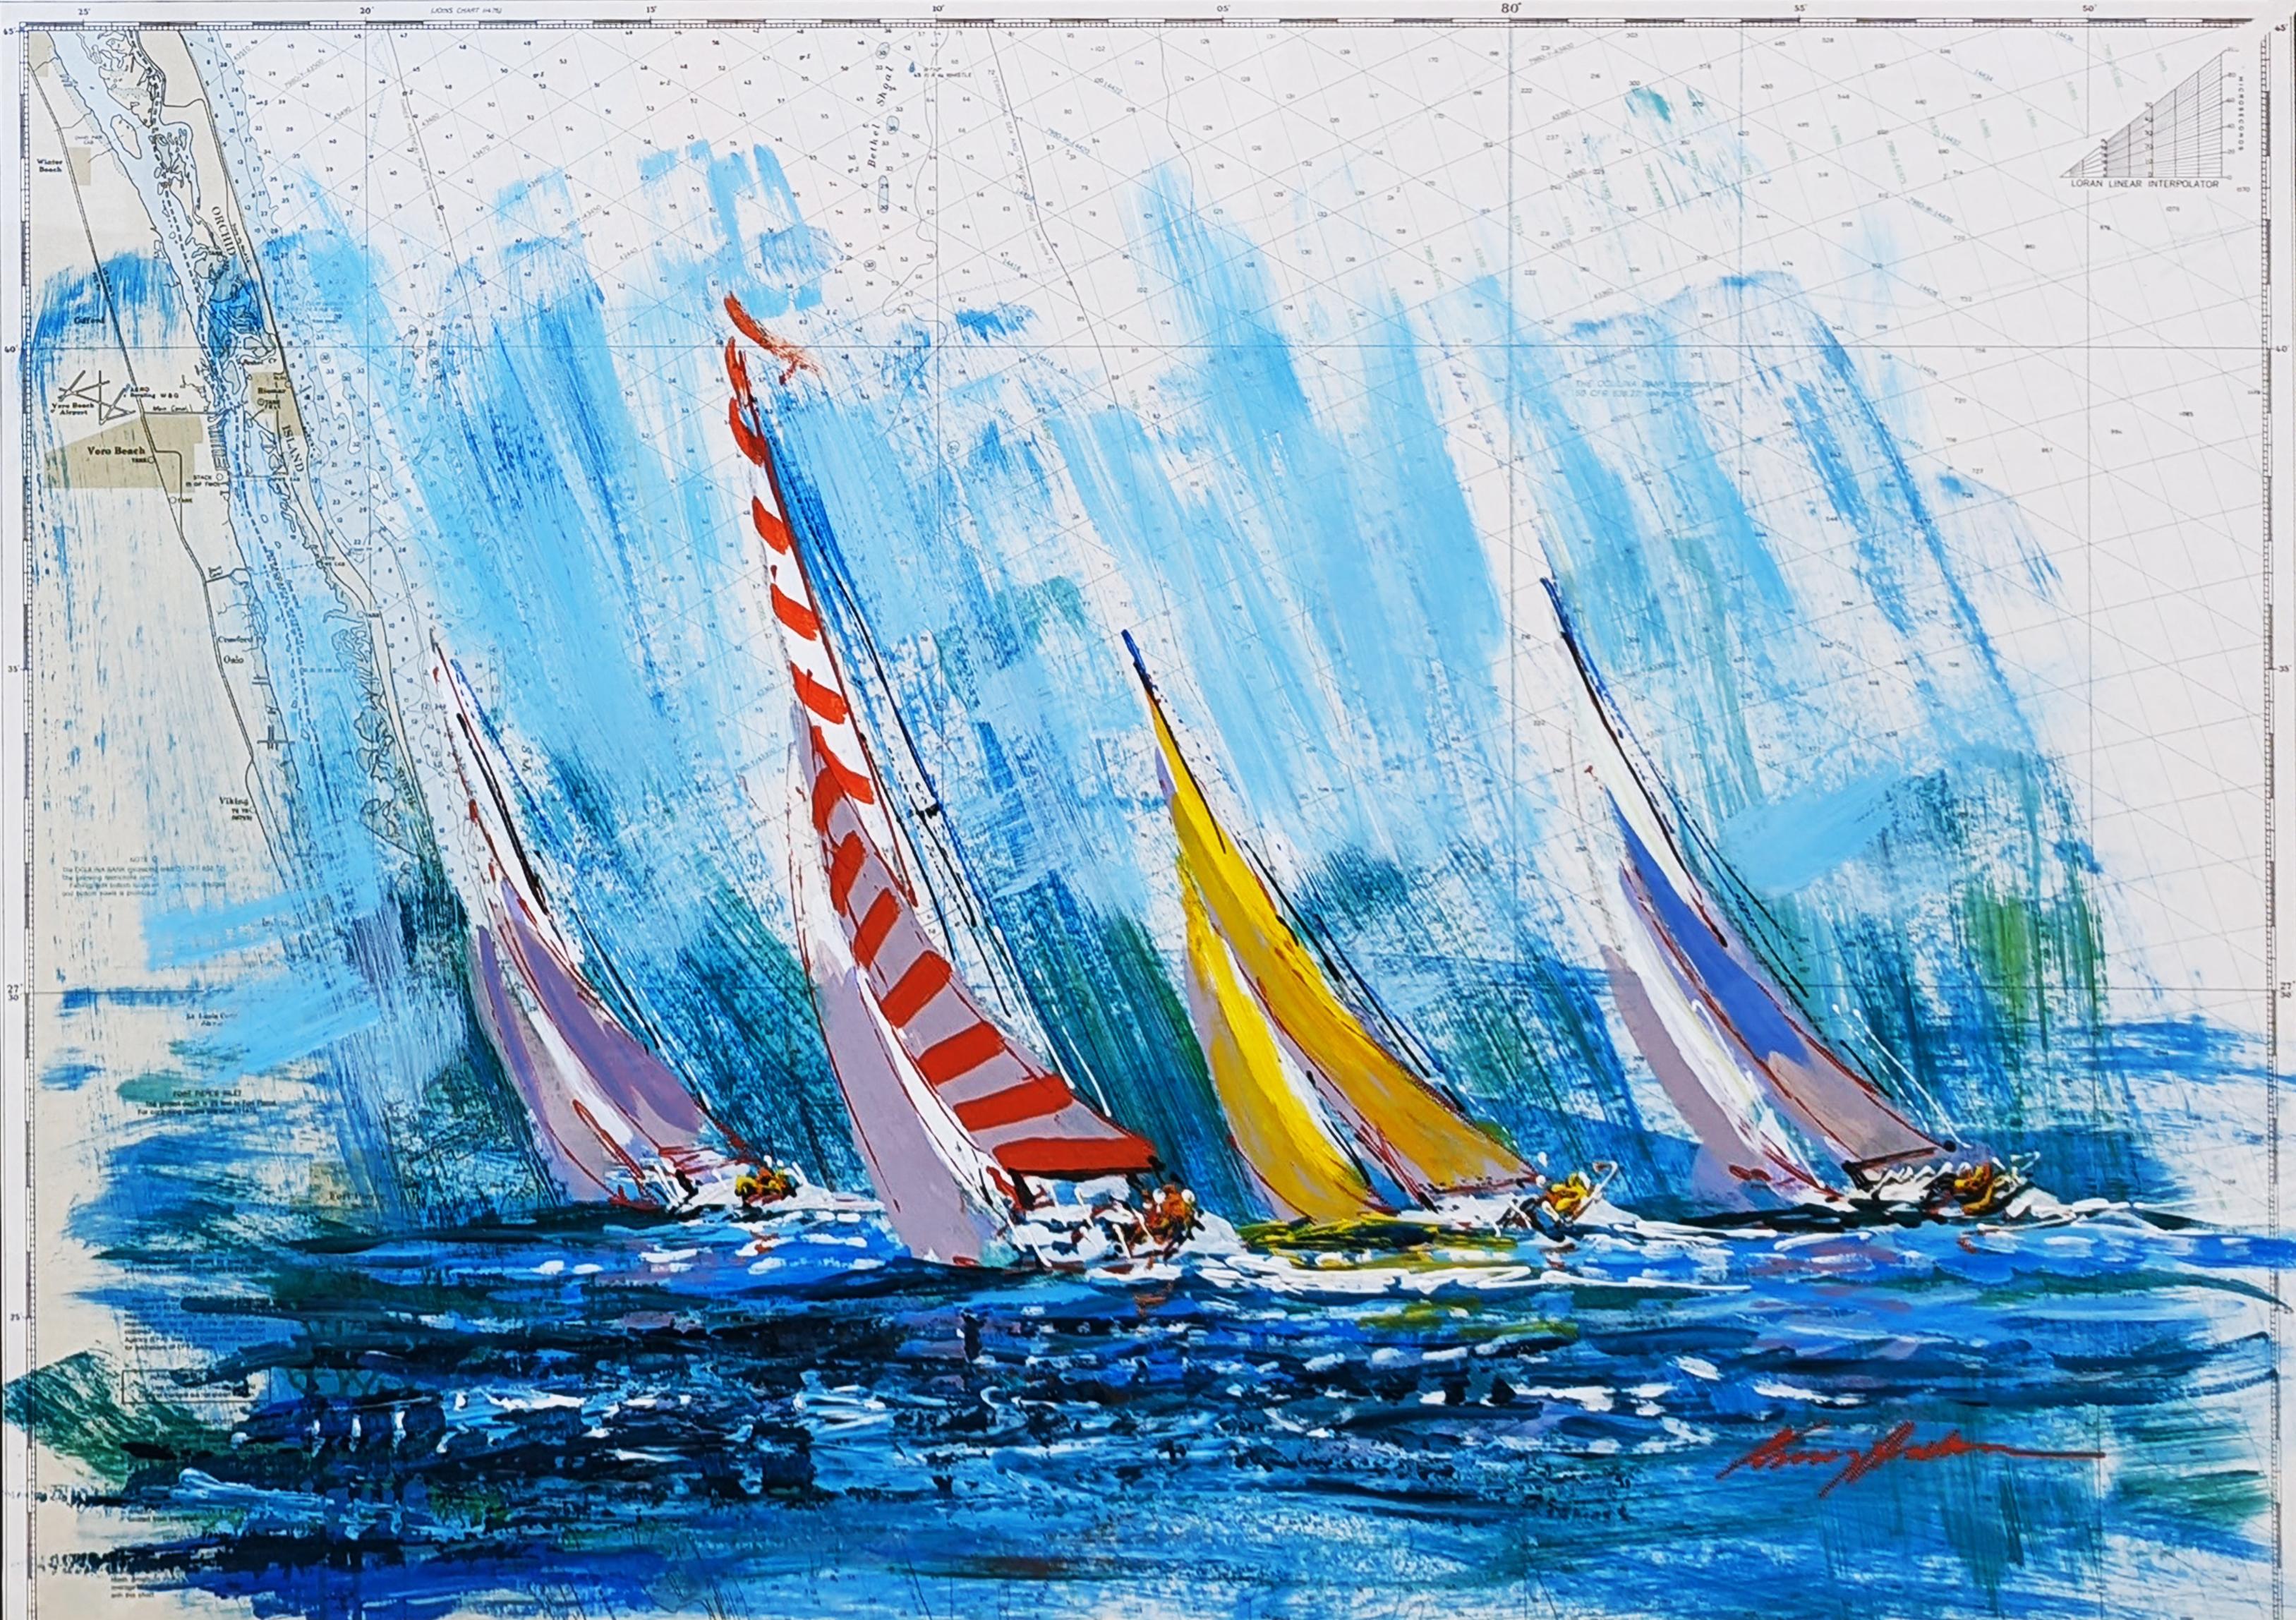 SAILBOATS - Painting by Kerry Hallam